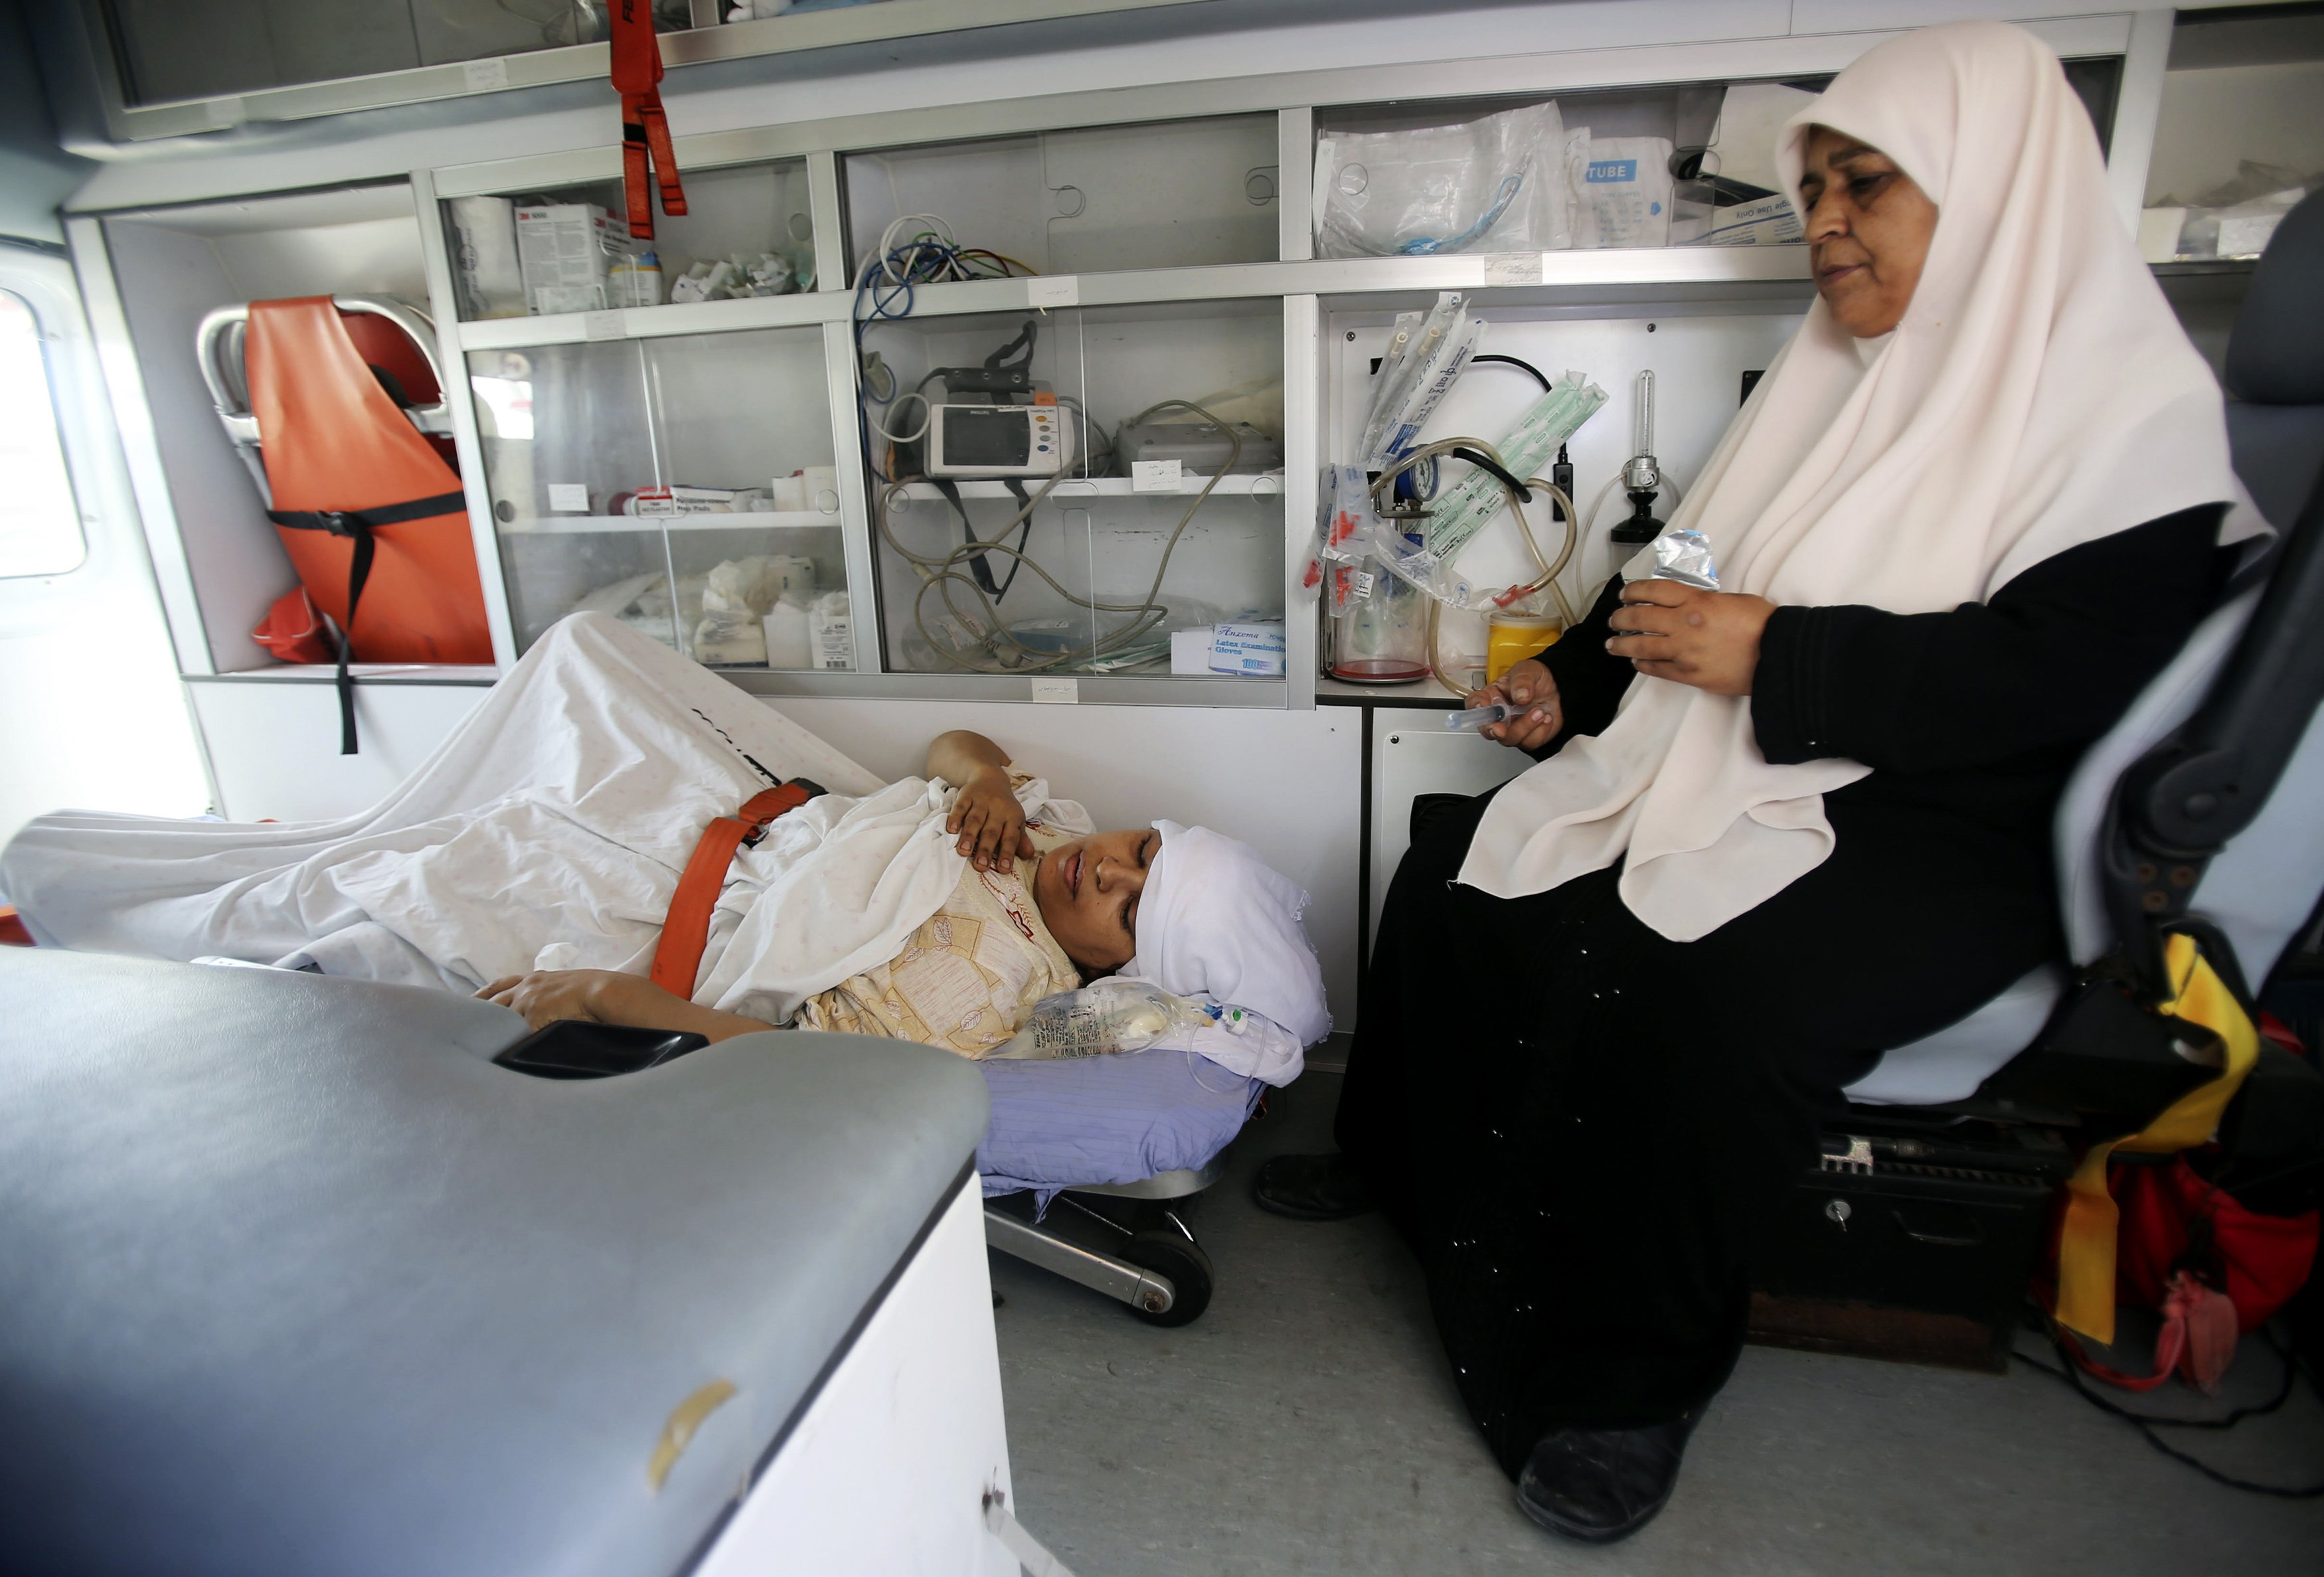 A Palestinian woman, who medics said was wounded in an Israeli air strike, lies on a bed inside an ambulance waiting to cross into Egypt, at Rafah crossing in southern Gaza Strip July 10, 2014. At least 74 Palestinians, most of them civilians, have been k